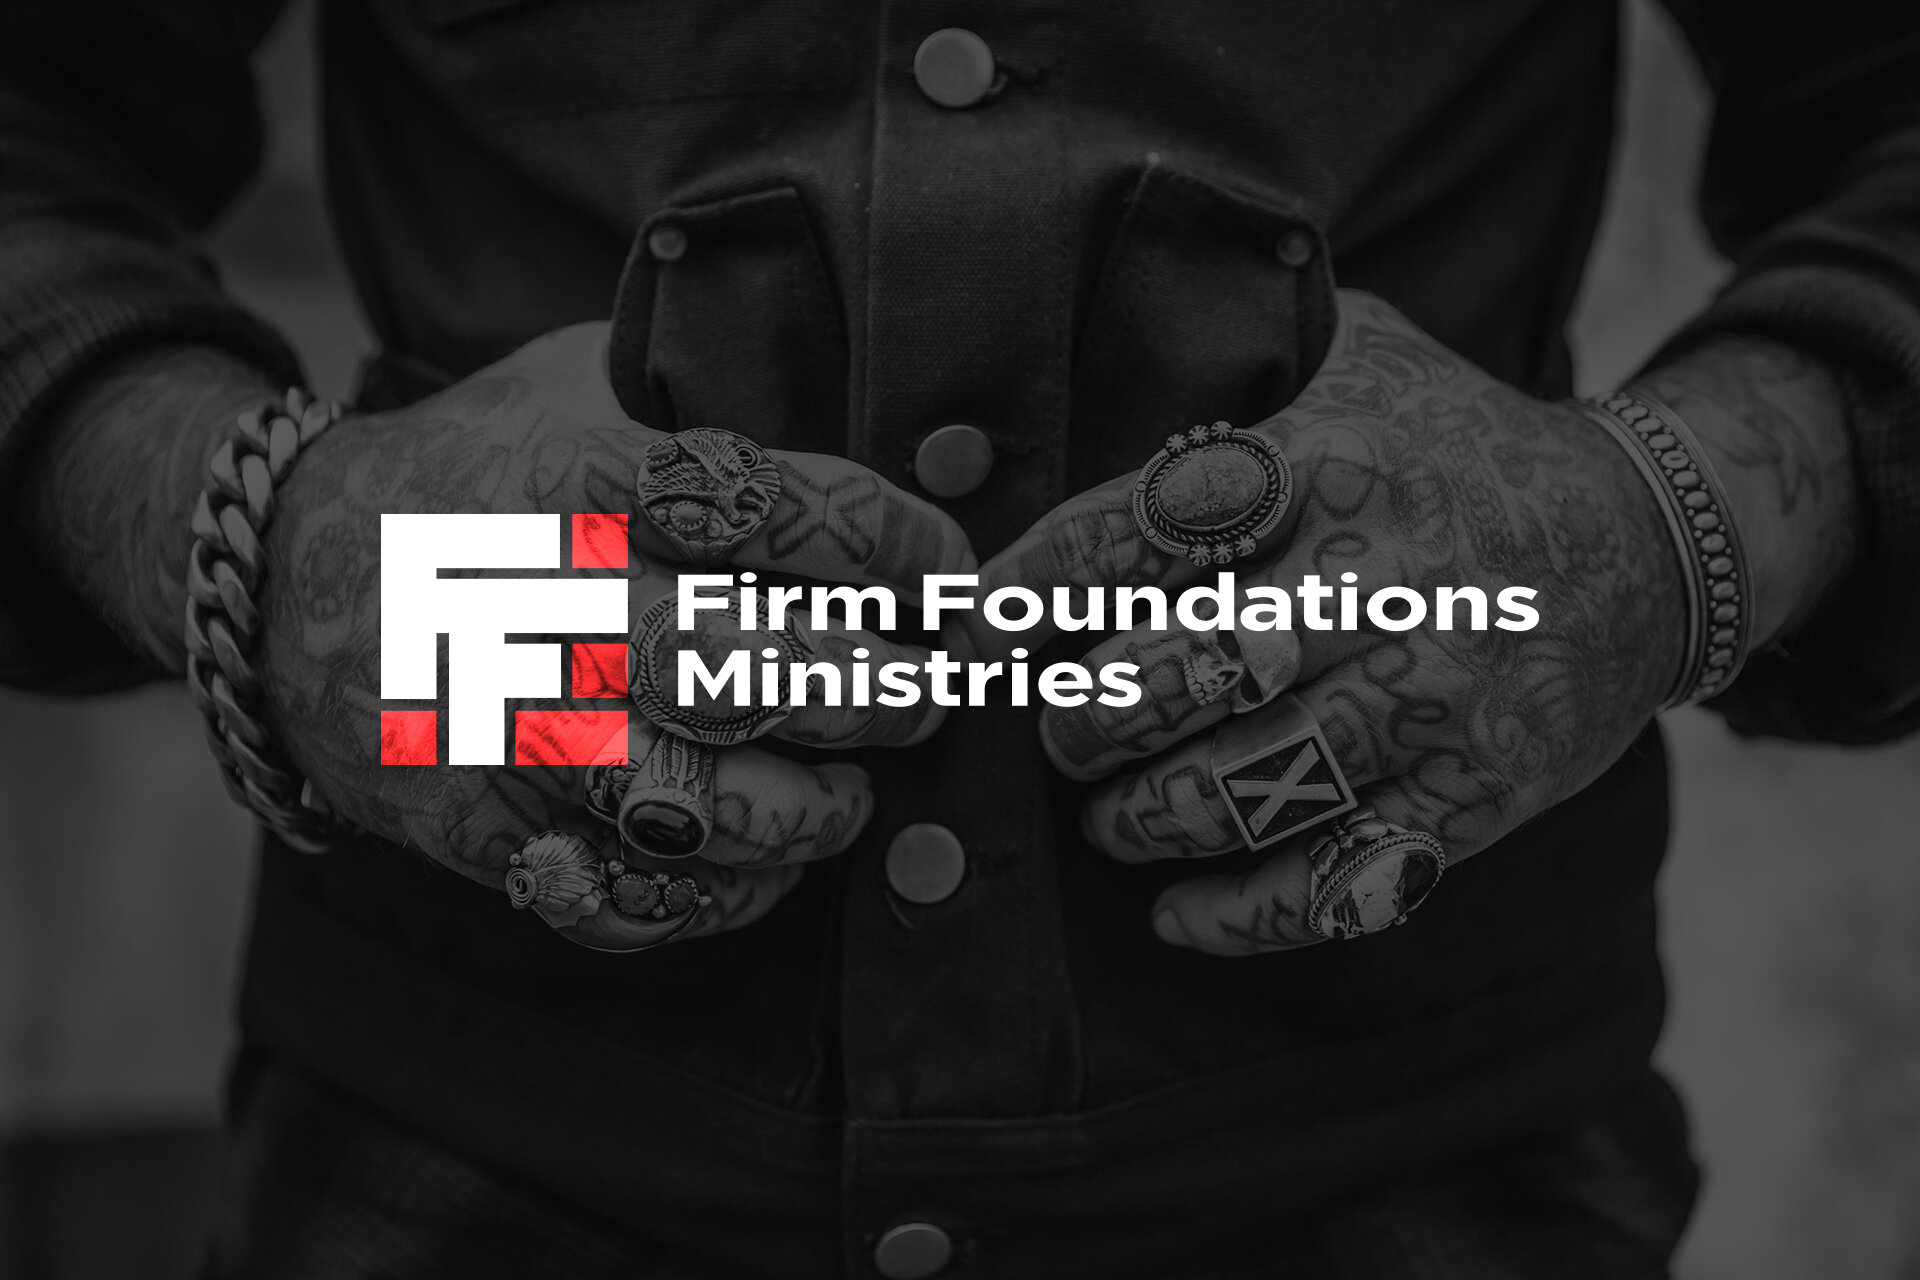 Firm Foundations Ministries